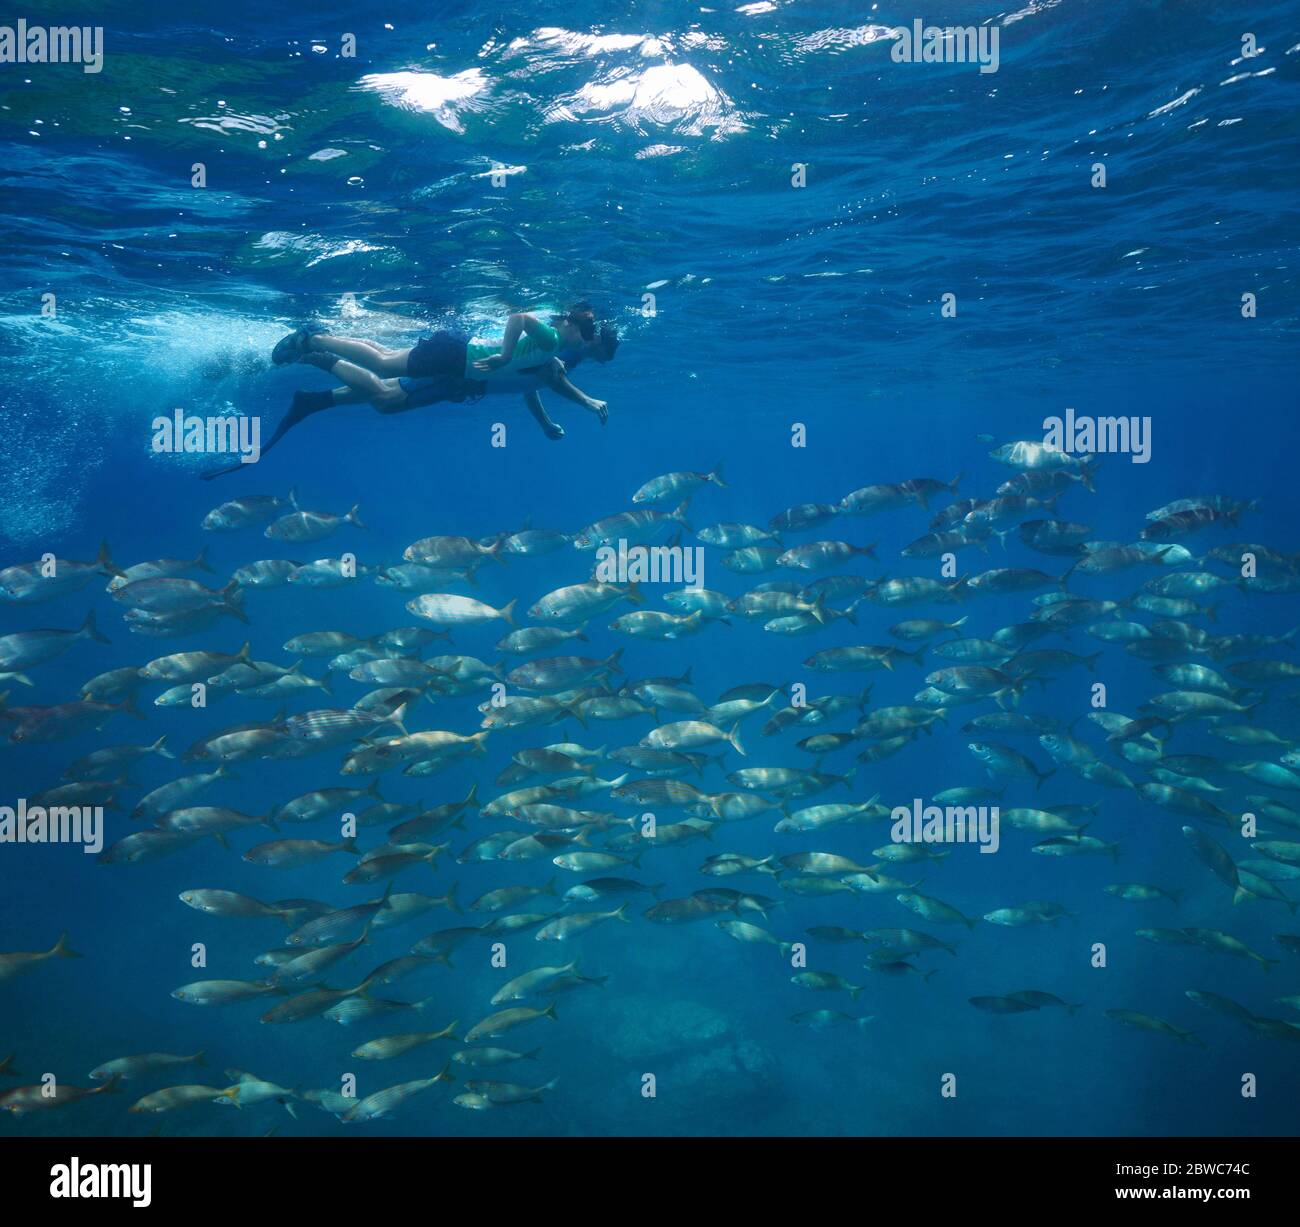 People snorkeling with a group of fish underwater, Mediterranean sea, France Stock Photo